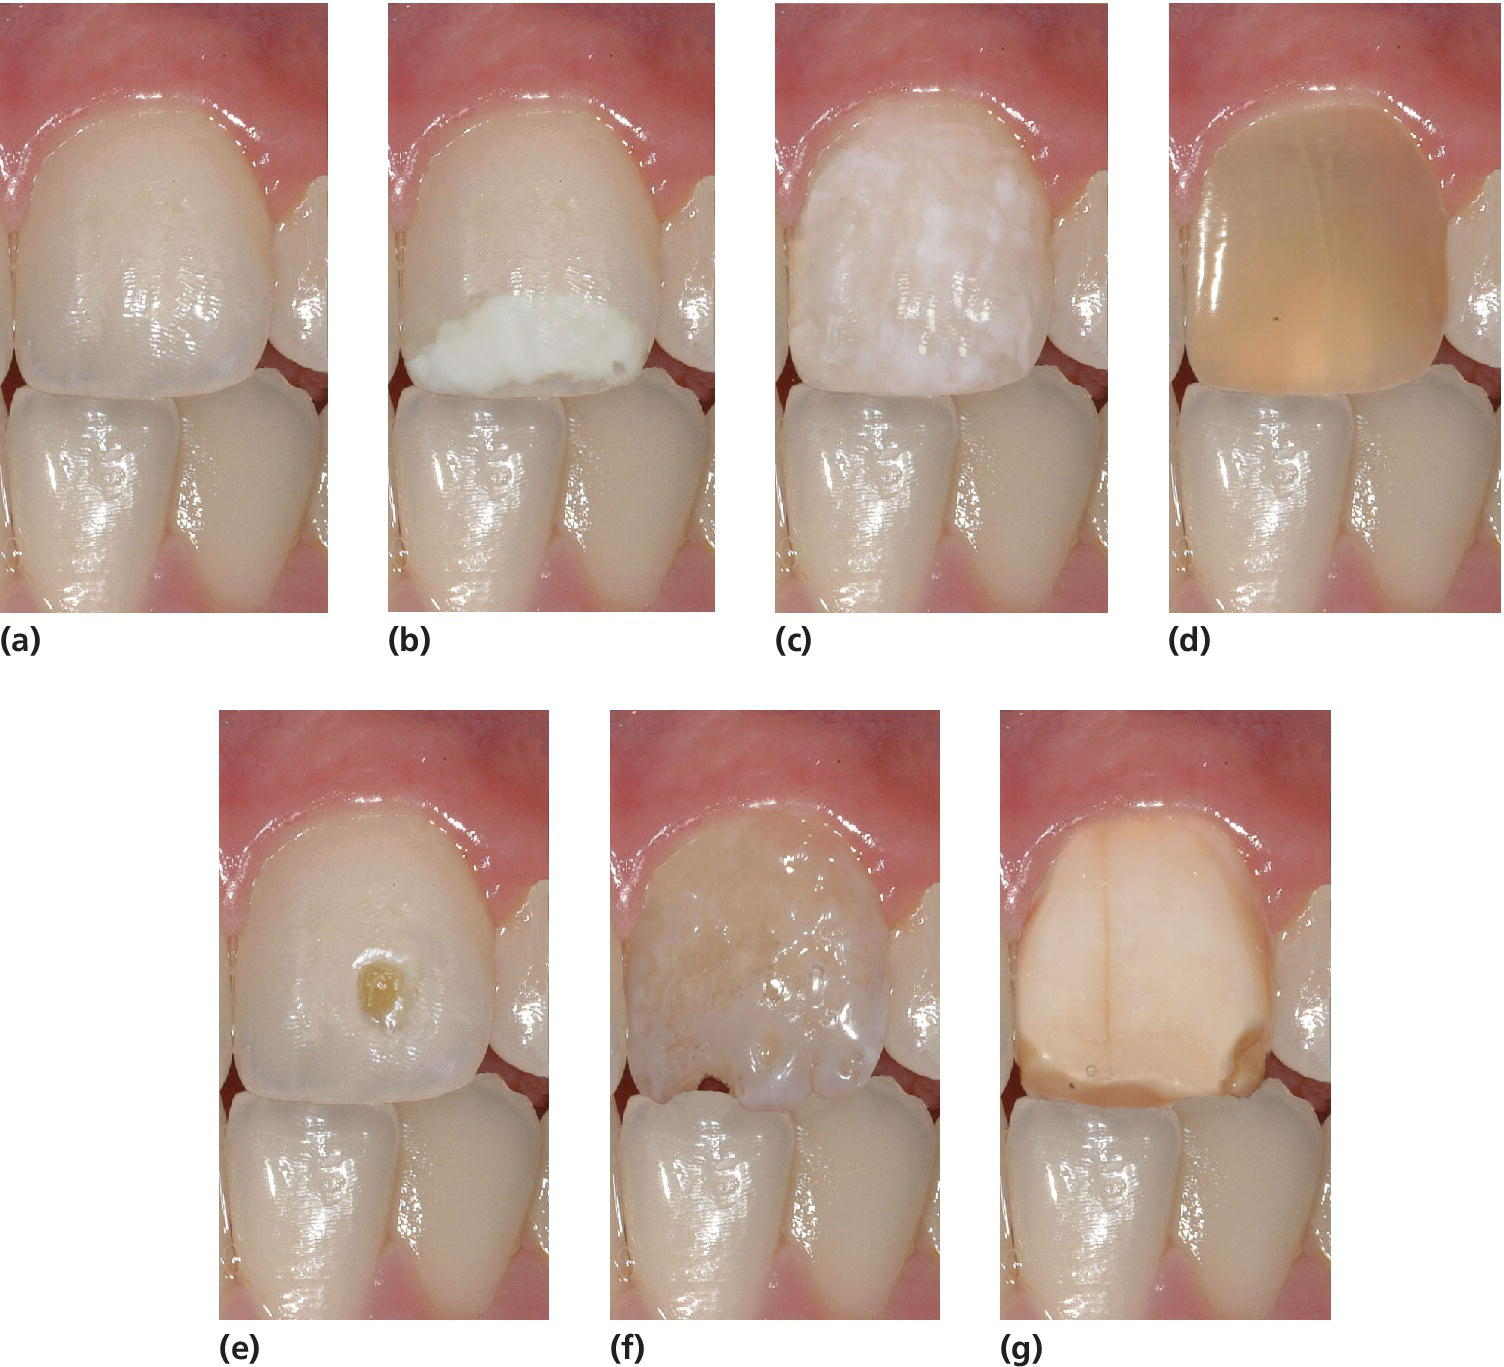 7 Photos of incisor 21, displaying the tooth in its natural appearance and illustrating classification and examples of 6 types of enamel defects due to disturbances in the tooth formation.